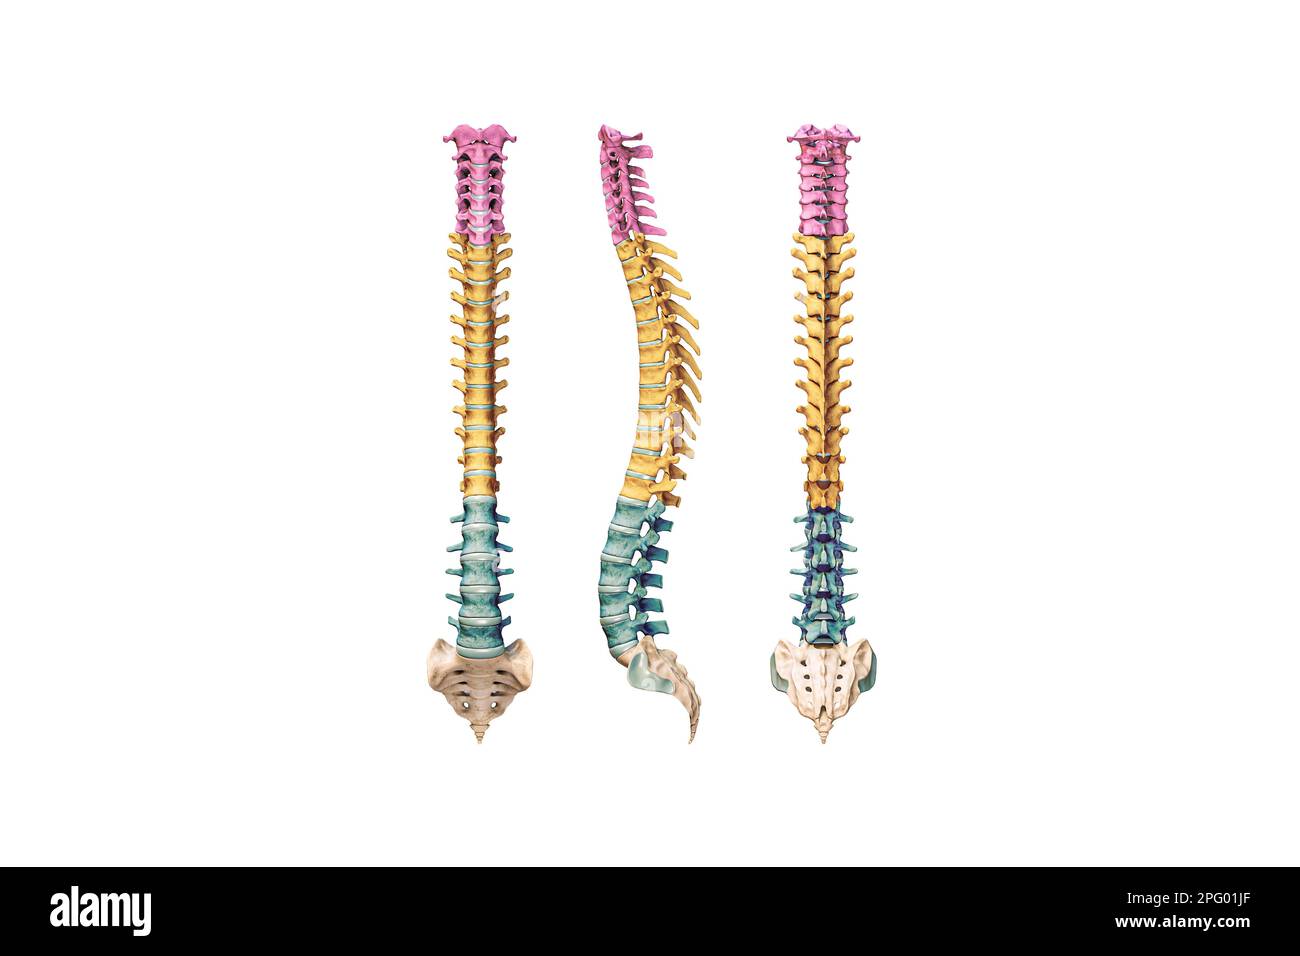 Human spine or spinal column with colored vertebrae isolated on white background 3D rendering illustration. Anterior, lateral and posterior views. Ana Stock Photo